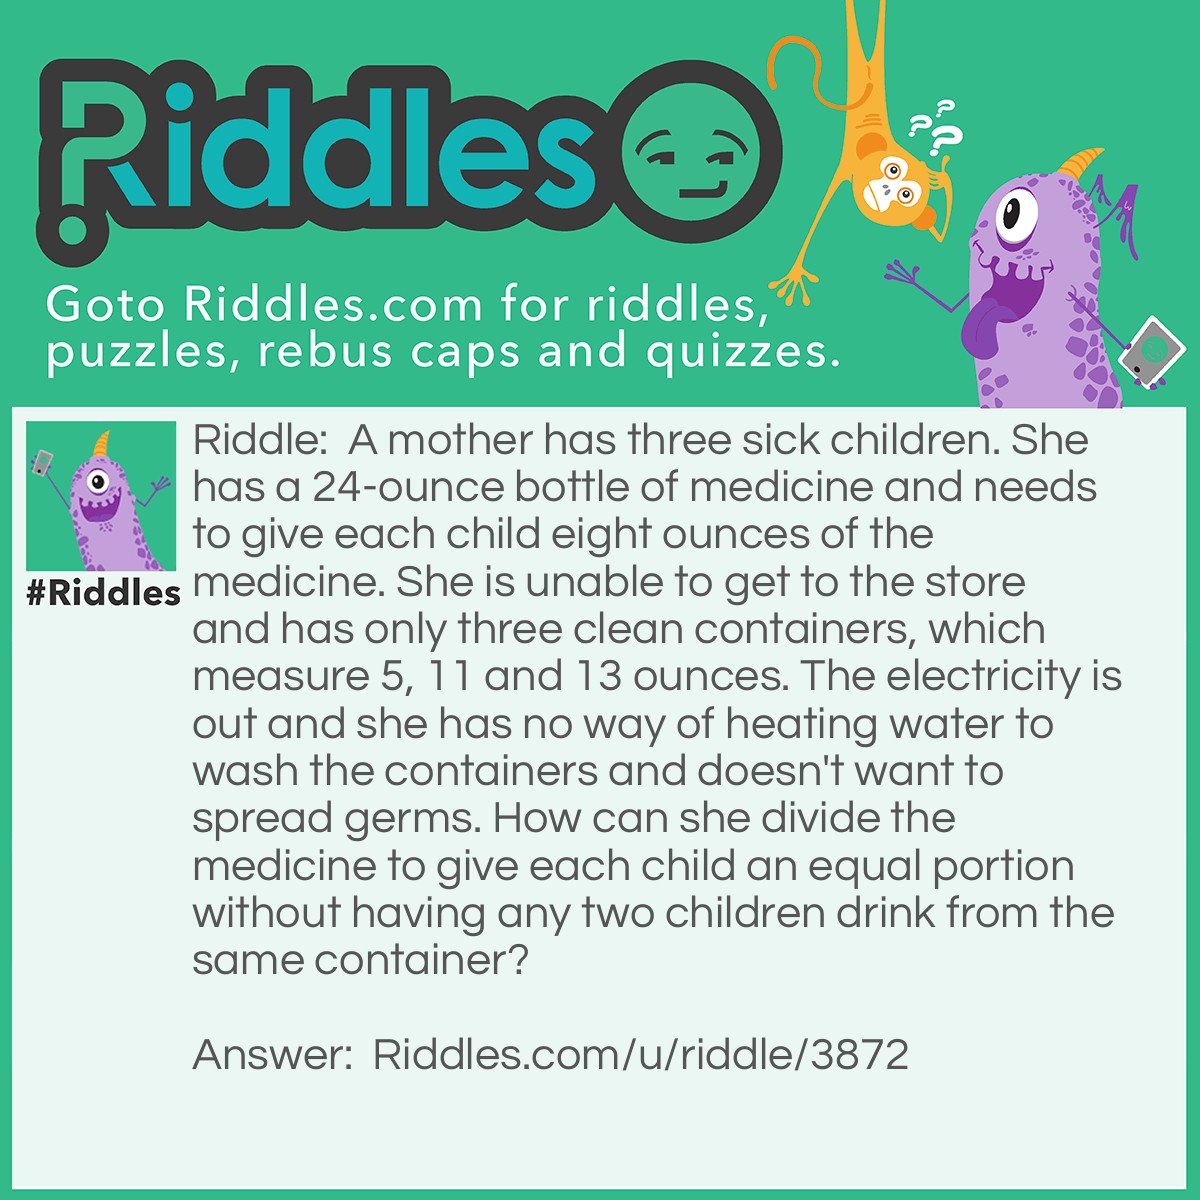 Riddle: A mother has three sick children. She has a 24-ounce bottle of medicine and needs to give each child eight ounces of the medicine. She is unable to get to the store and has only three clean containers, which measure 5, 11 and 13 ounces. The electricity is out and she has no way of heating water to wash the containers and doesn't want to spread germs. How can she divide the medicine to give each child an equal portion without having any two children drink from the same container? Answer: Fill the 5 oz. and 11 oz. Containers from the 24 oz. container. This leaves 8 oz. in the 24 oz. bottle. Next empty the 11 oz. bottle by pouring the contents into the 13 oz. bottle. Fill the 13 oz. bottle from the 5 oz. container (with 2 oz.) and put the remaining 3 oz. in the 11 oz. bottle. This leaves the 5 oz. container empty. Now pour 5 oz. from the 13 oz. bottle into the 5 oz. bottle leaving 8 oz. in the 13 oz. bottle. Finally pour the 5 oz. bottle contents into the 11 oz. bottle giving 8 oz. in this container.